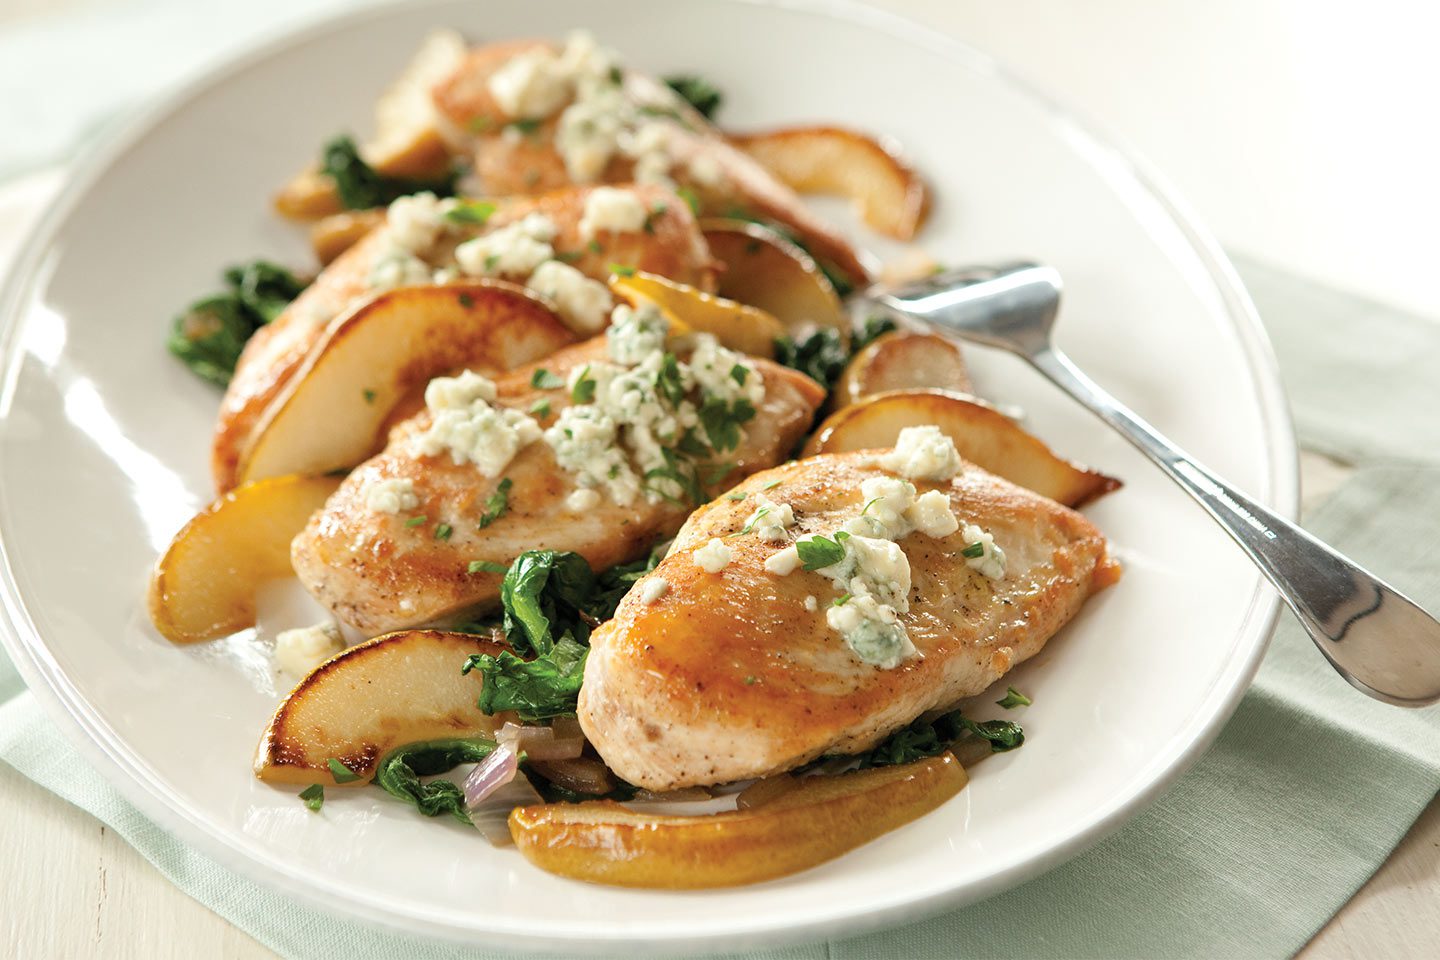 Baked Chicken with Spinach, Pears, & Blue Cheese